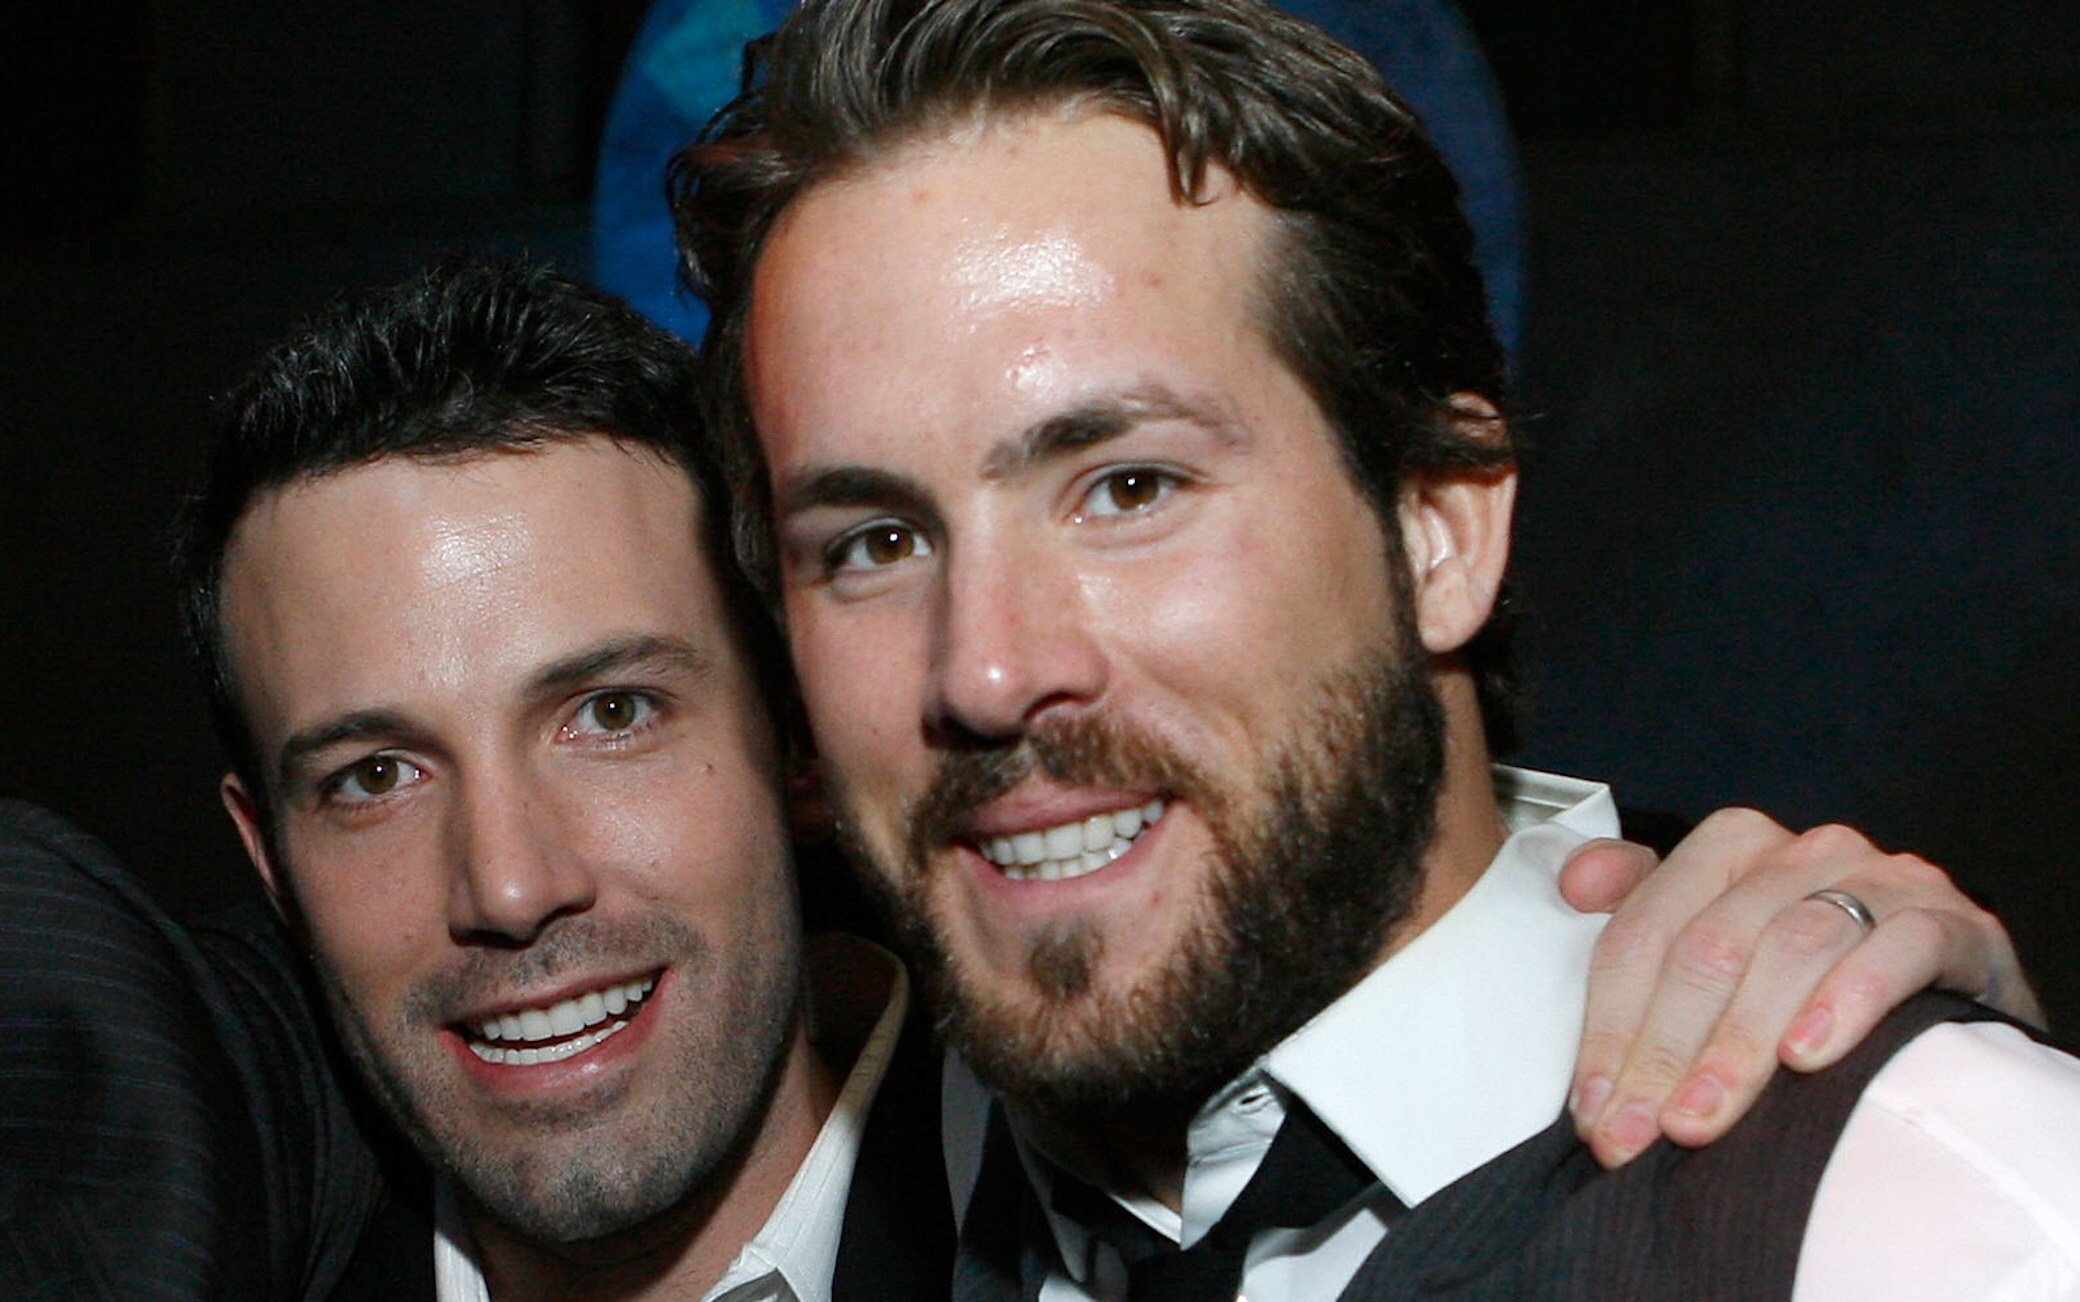 Ryan Reynolds has been mistaken for Ben Affleck for years in a NY pizzeria